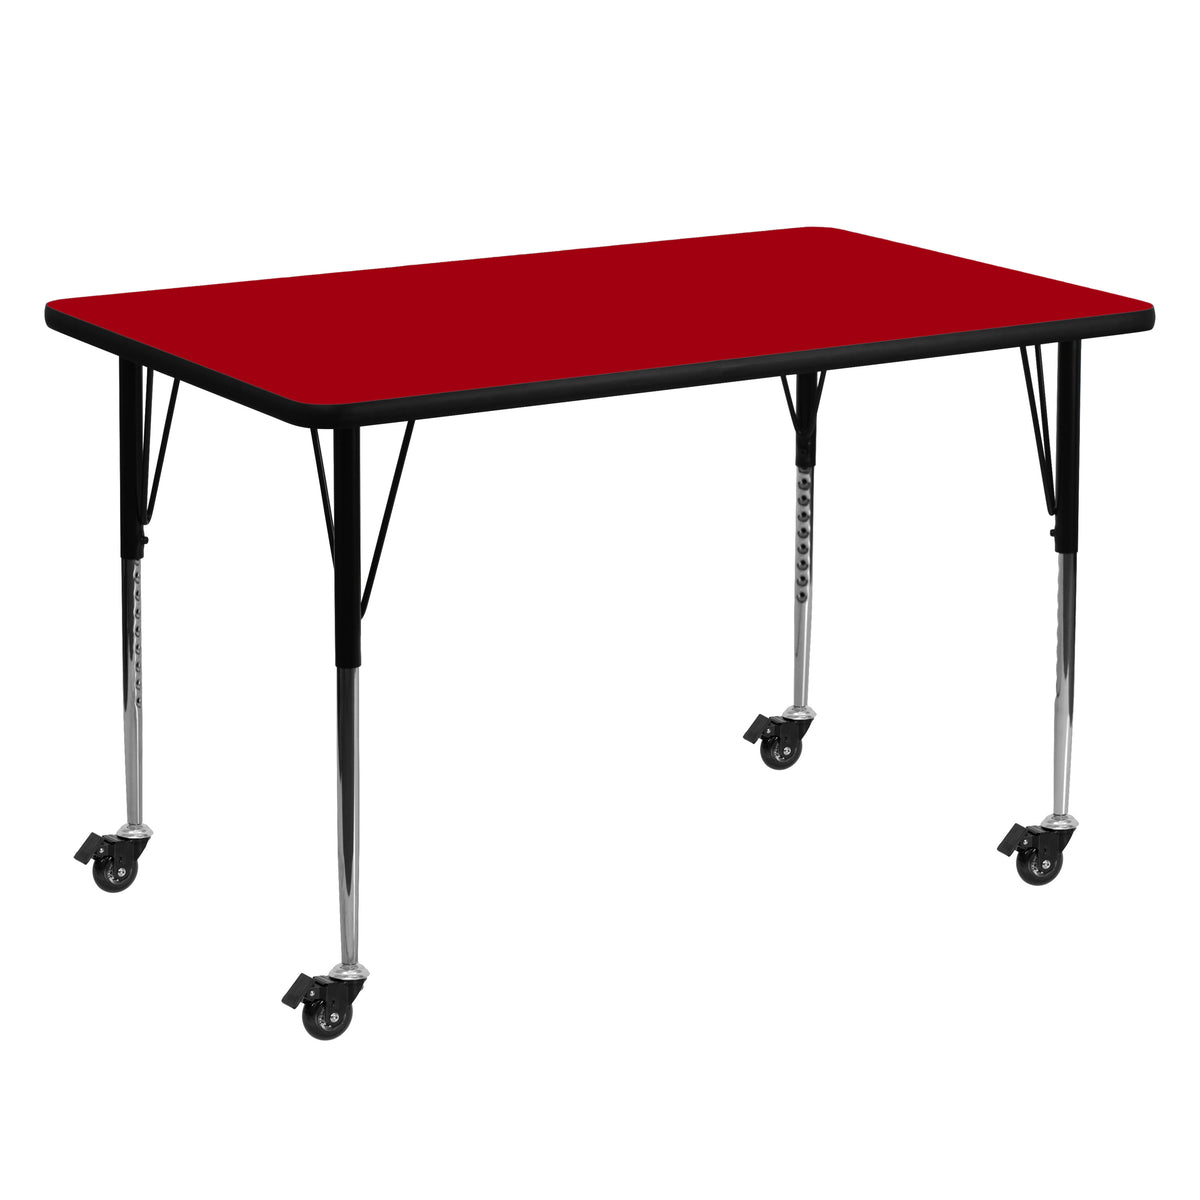 Red |#| Mobile 30inchW x 60inchL Rectangular Red Thermal Laminate Adjustable Activity Table